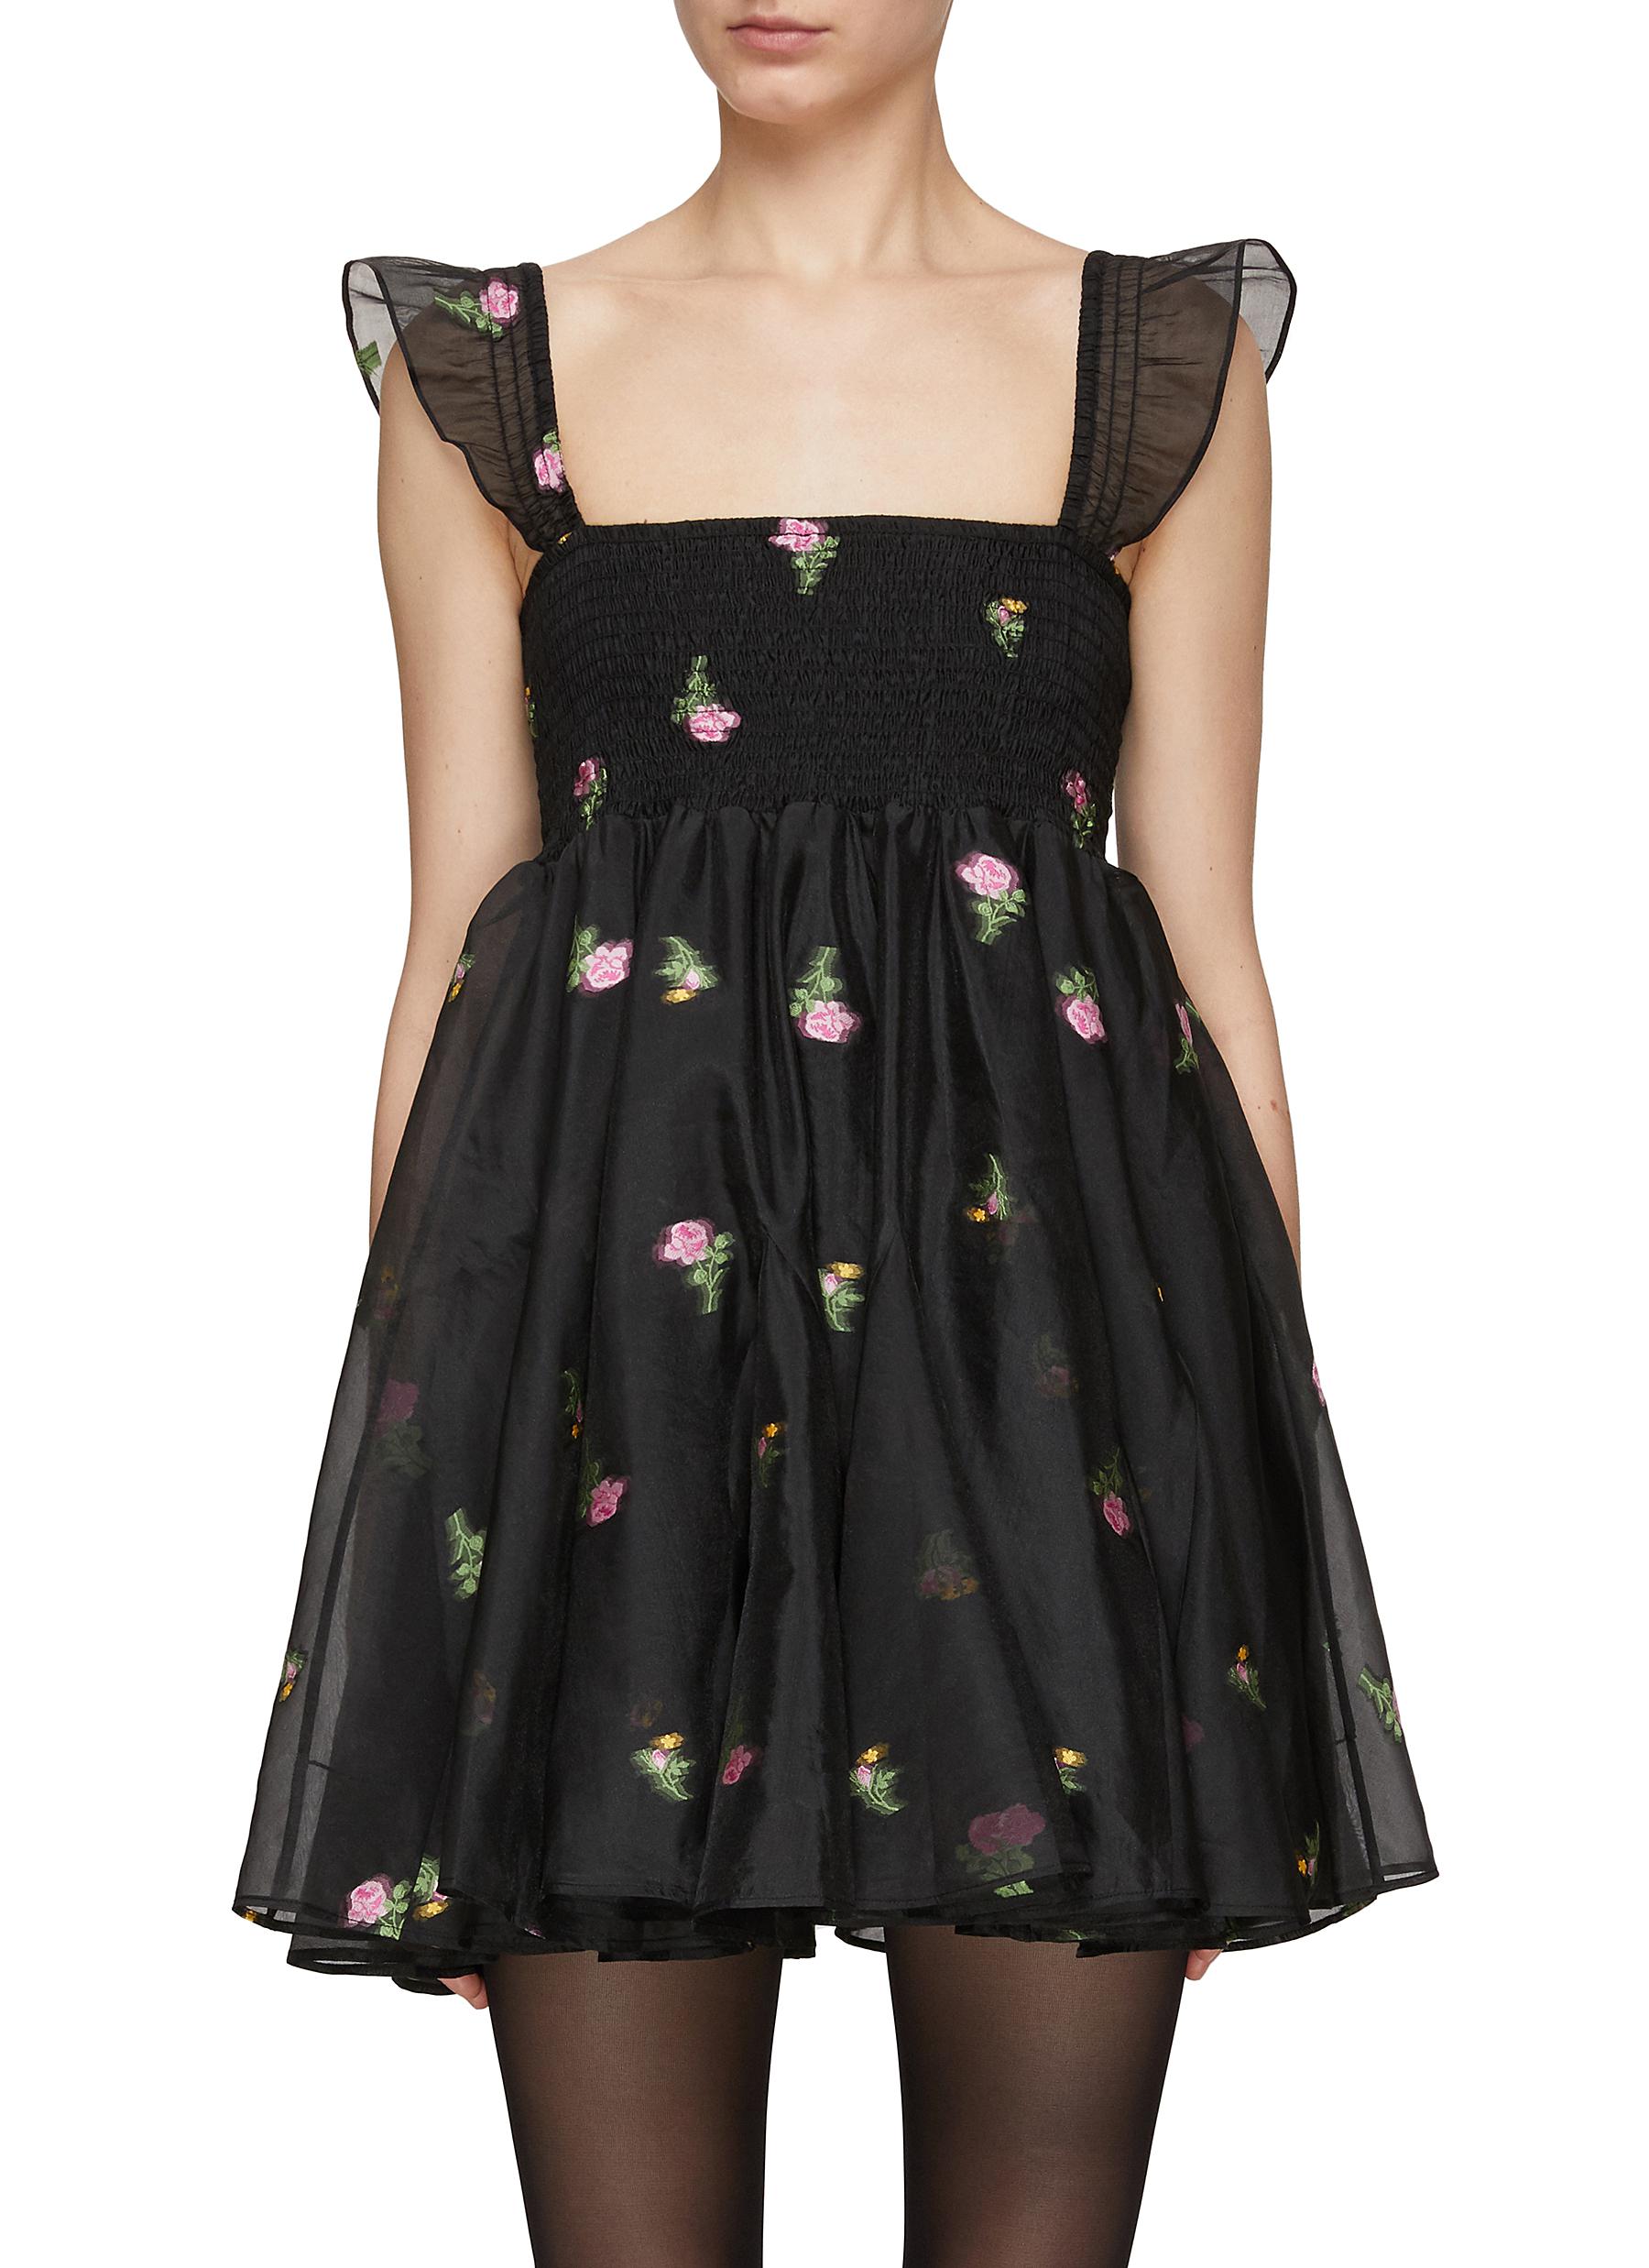 MING MA Floral Embroidery Ruffled Cap Sleeve Dress